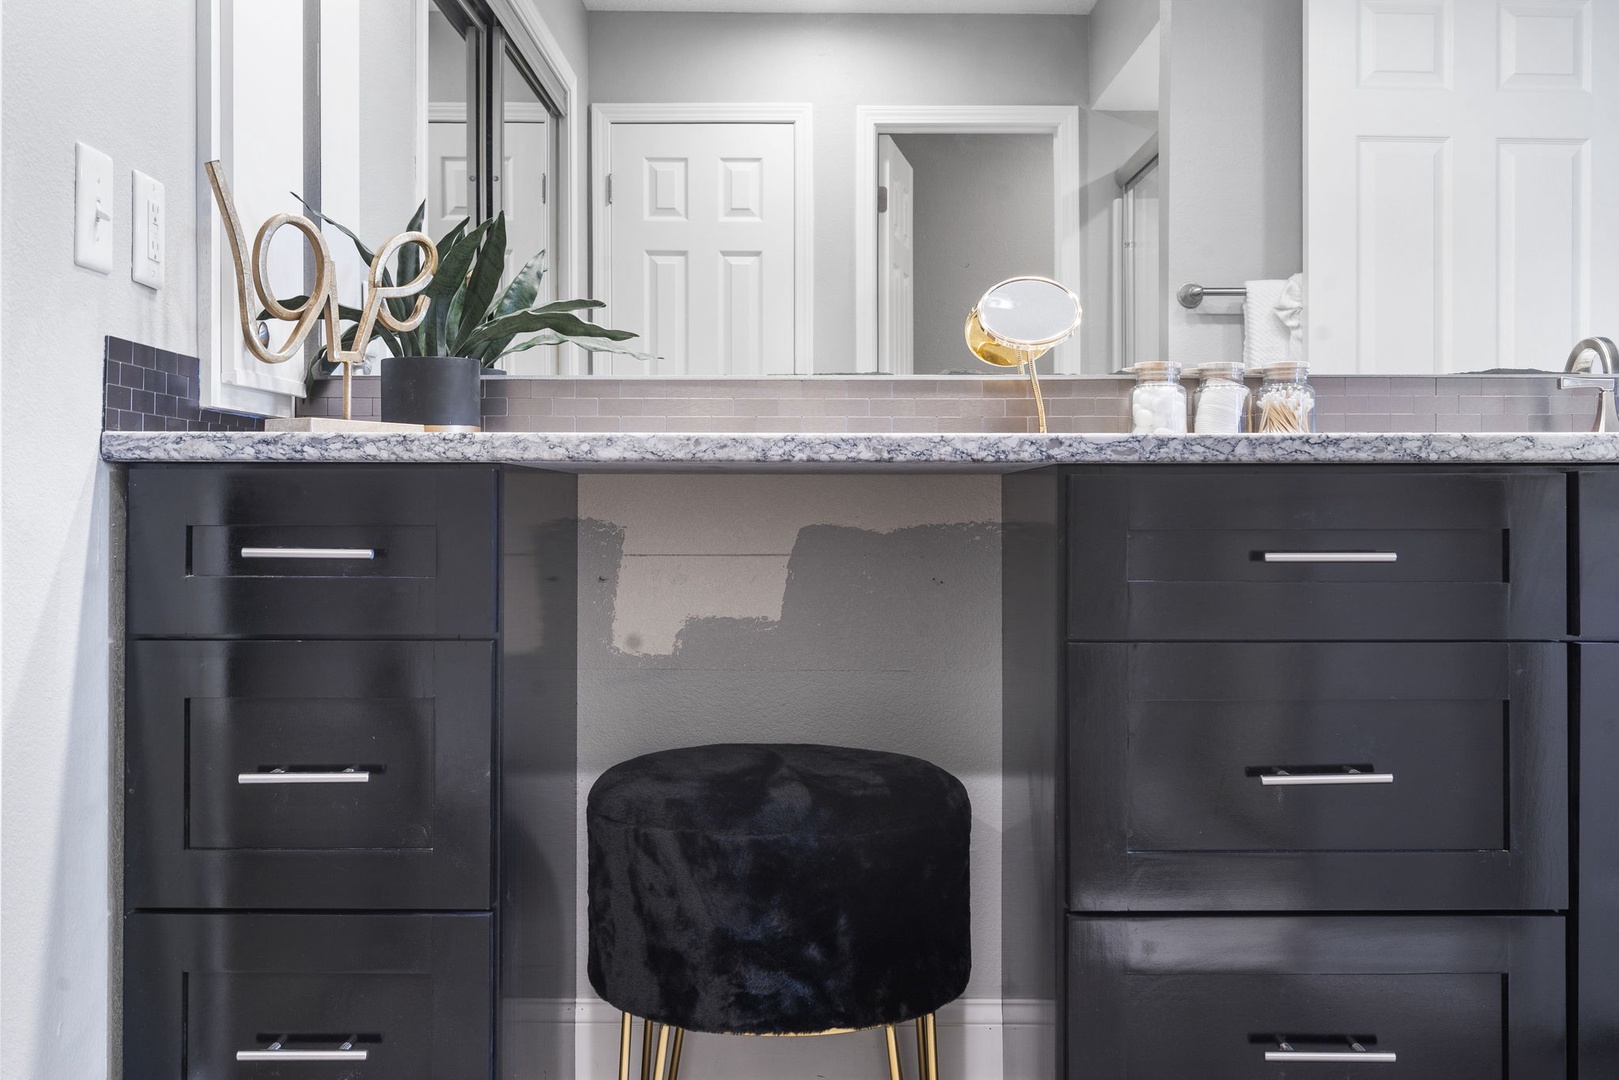 Unit 20: The second ensuite includes an oversized vanity & walk-in shower